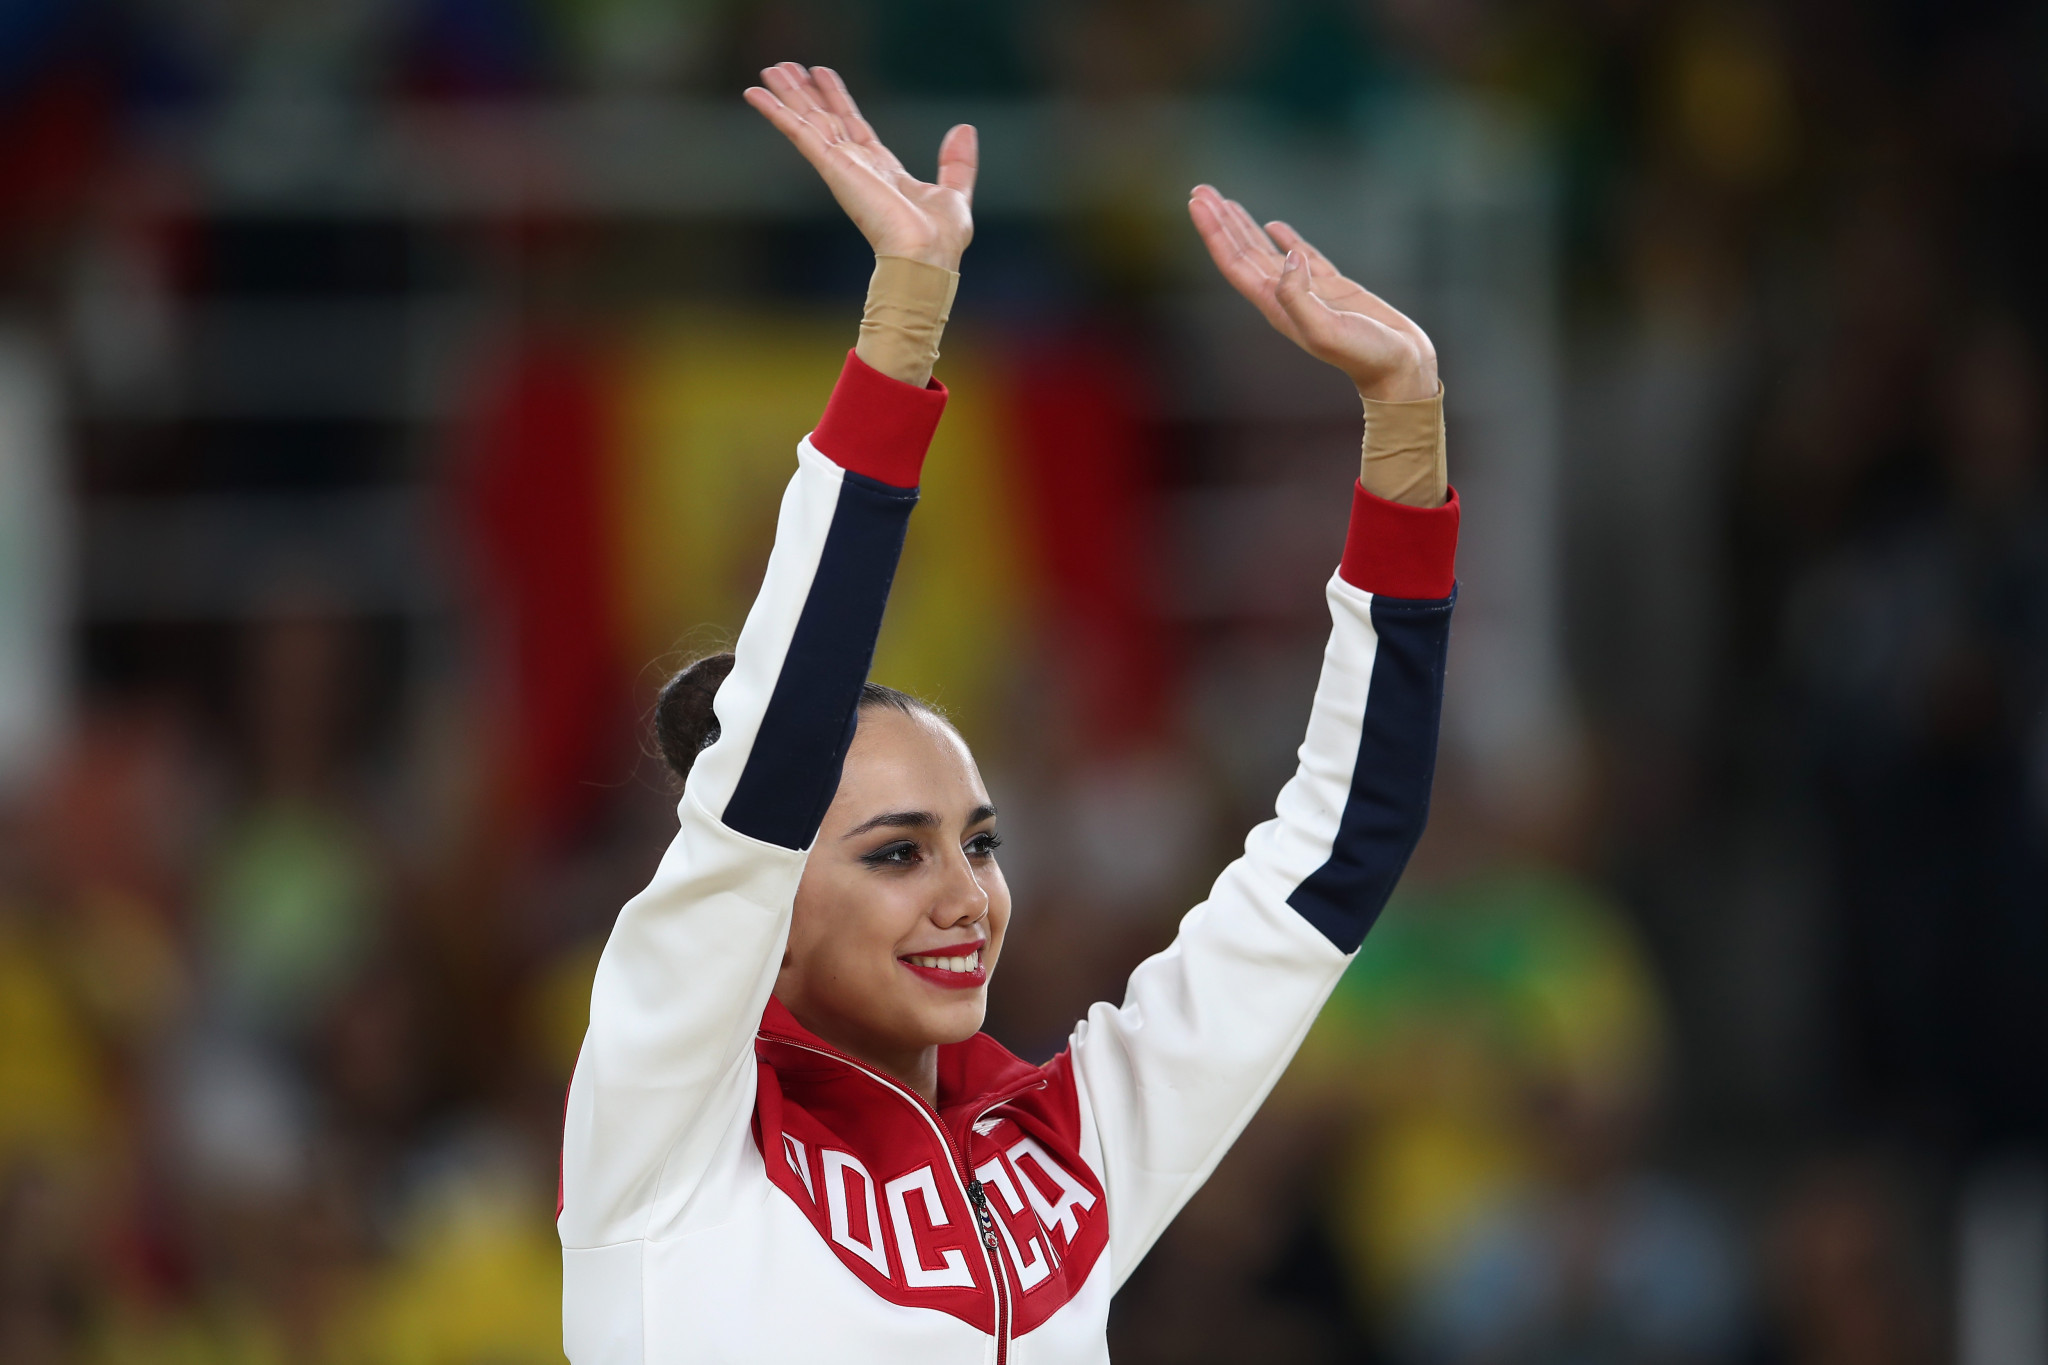 Rhythmic gymnast Margarita Mamun is leading an online exercise routine as part of virtual events on Olympic Day ©Getty Images